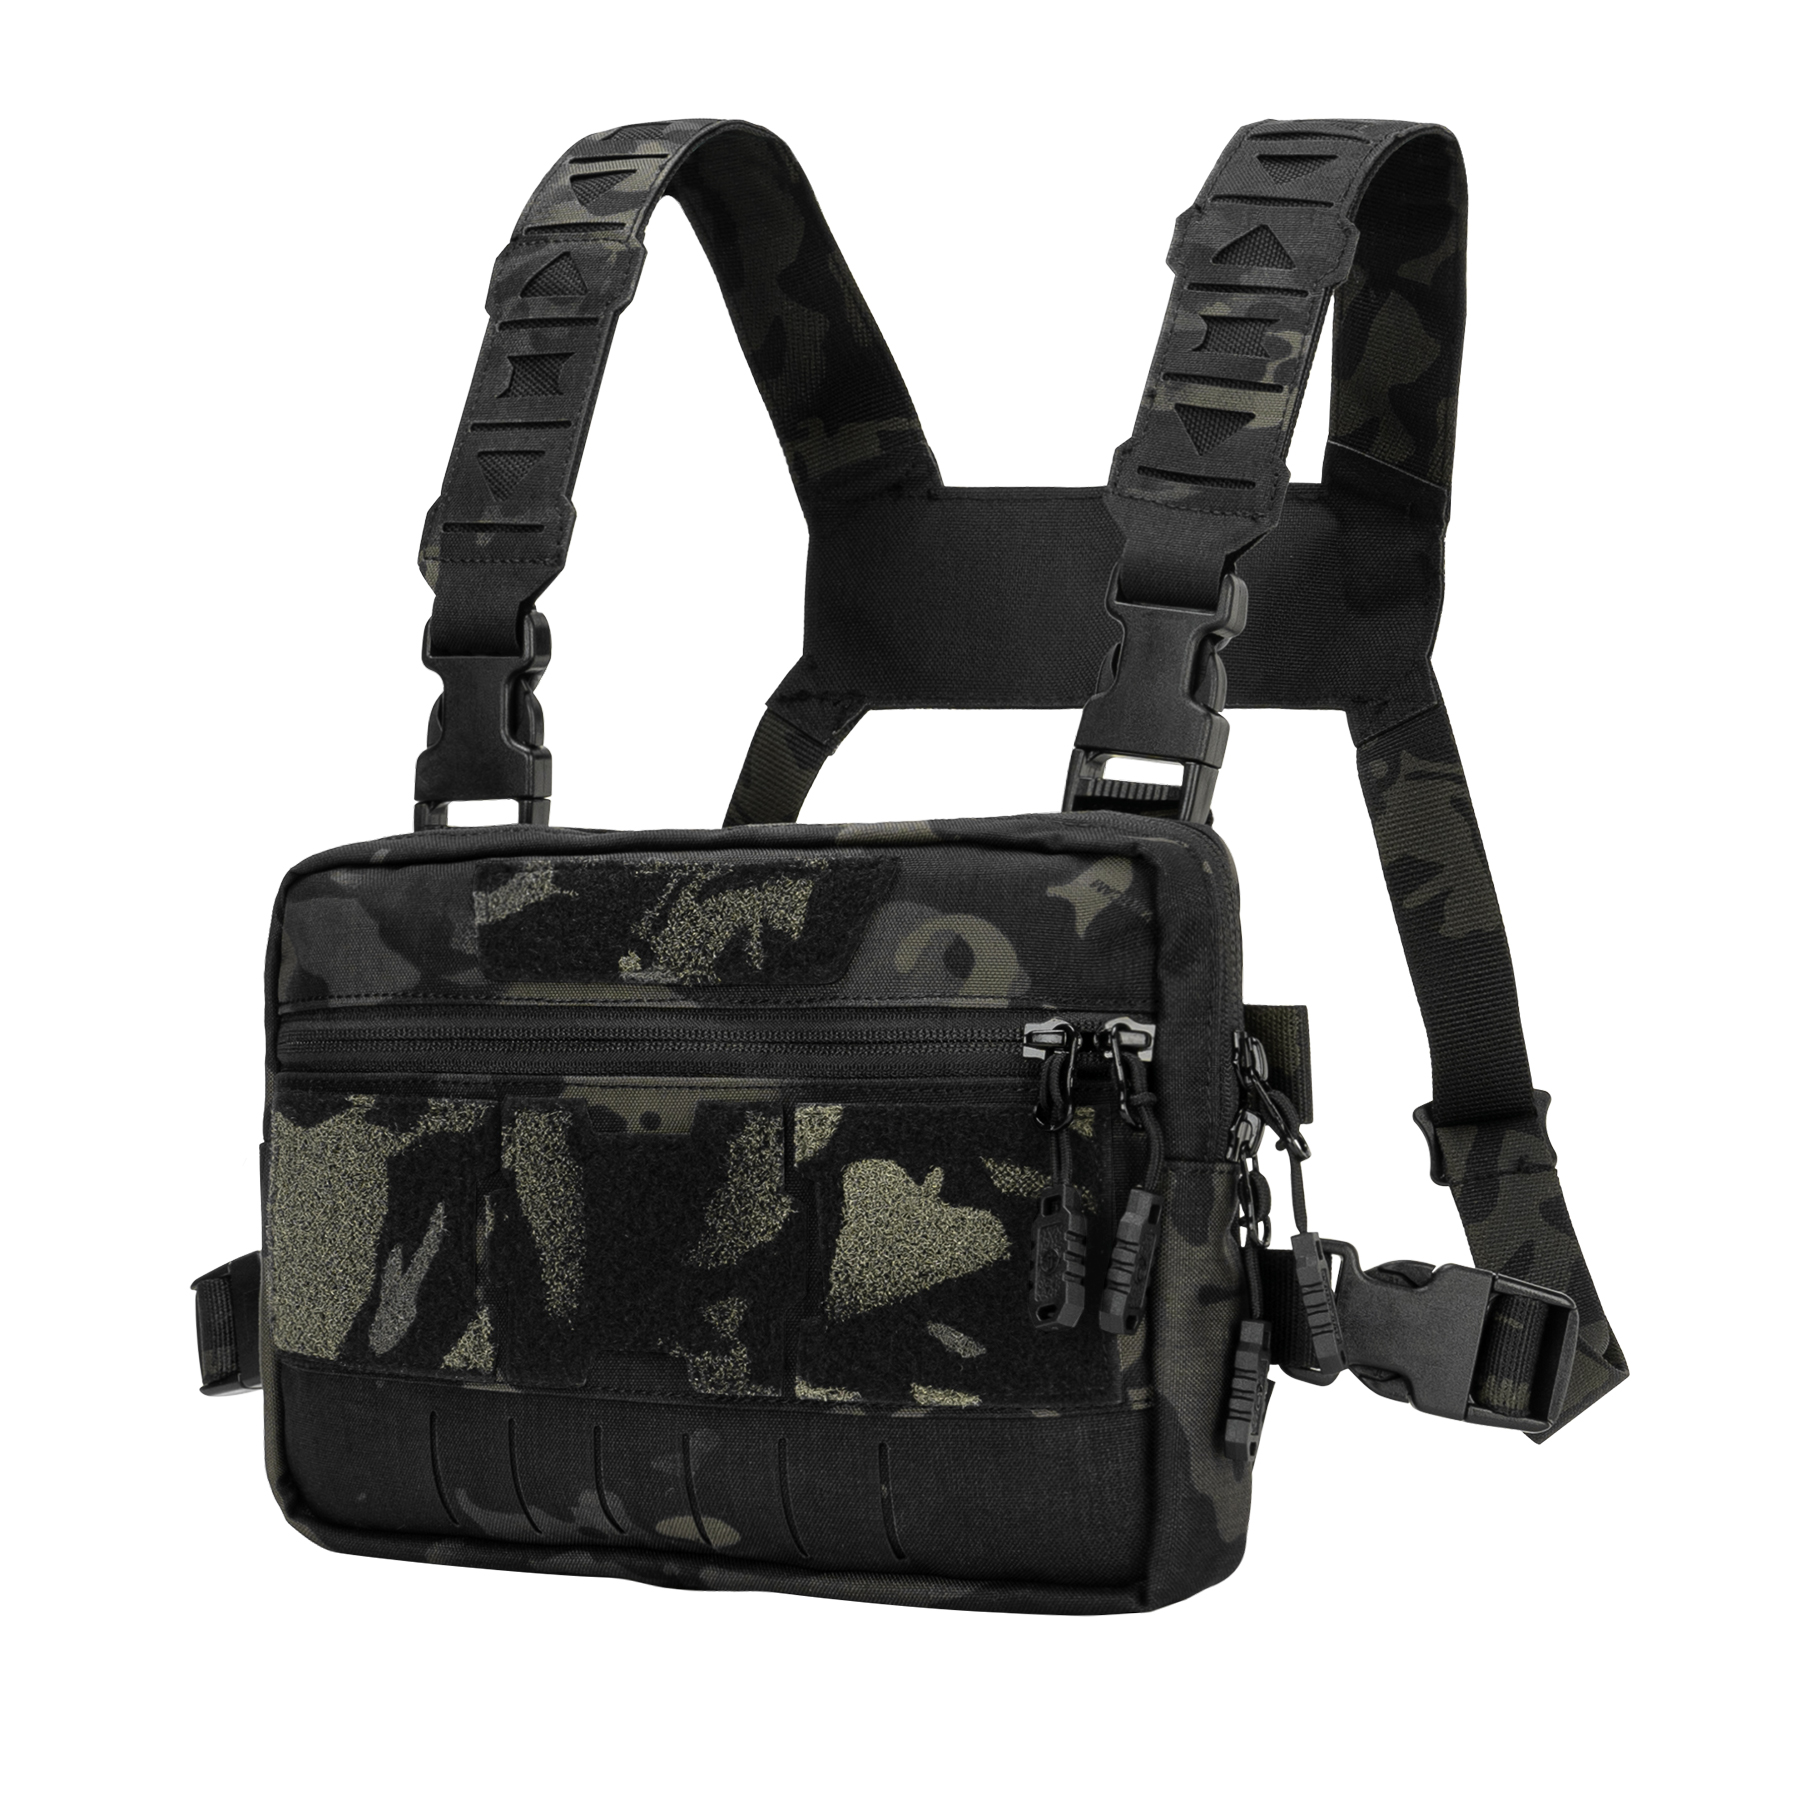 TOPTACPRO Tactical Chest Rig Bag Chest Recon Bag MOLLE Adjustable Shoulder Strap Pack 8511-IDOGEAR INDUSTRIAL